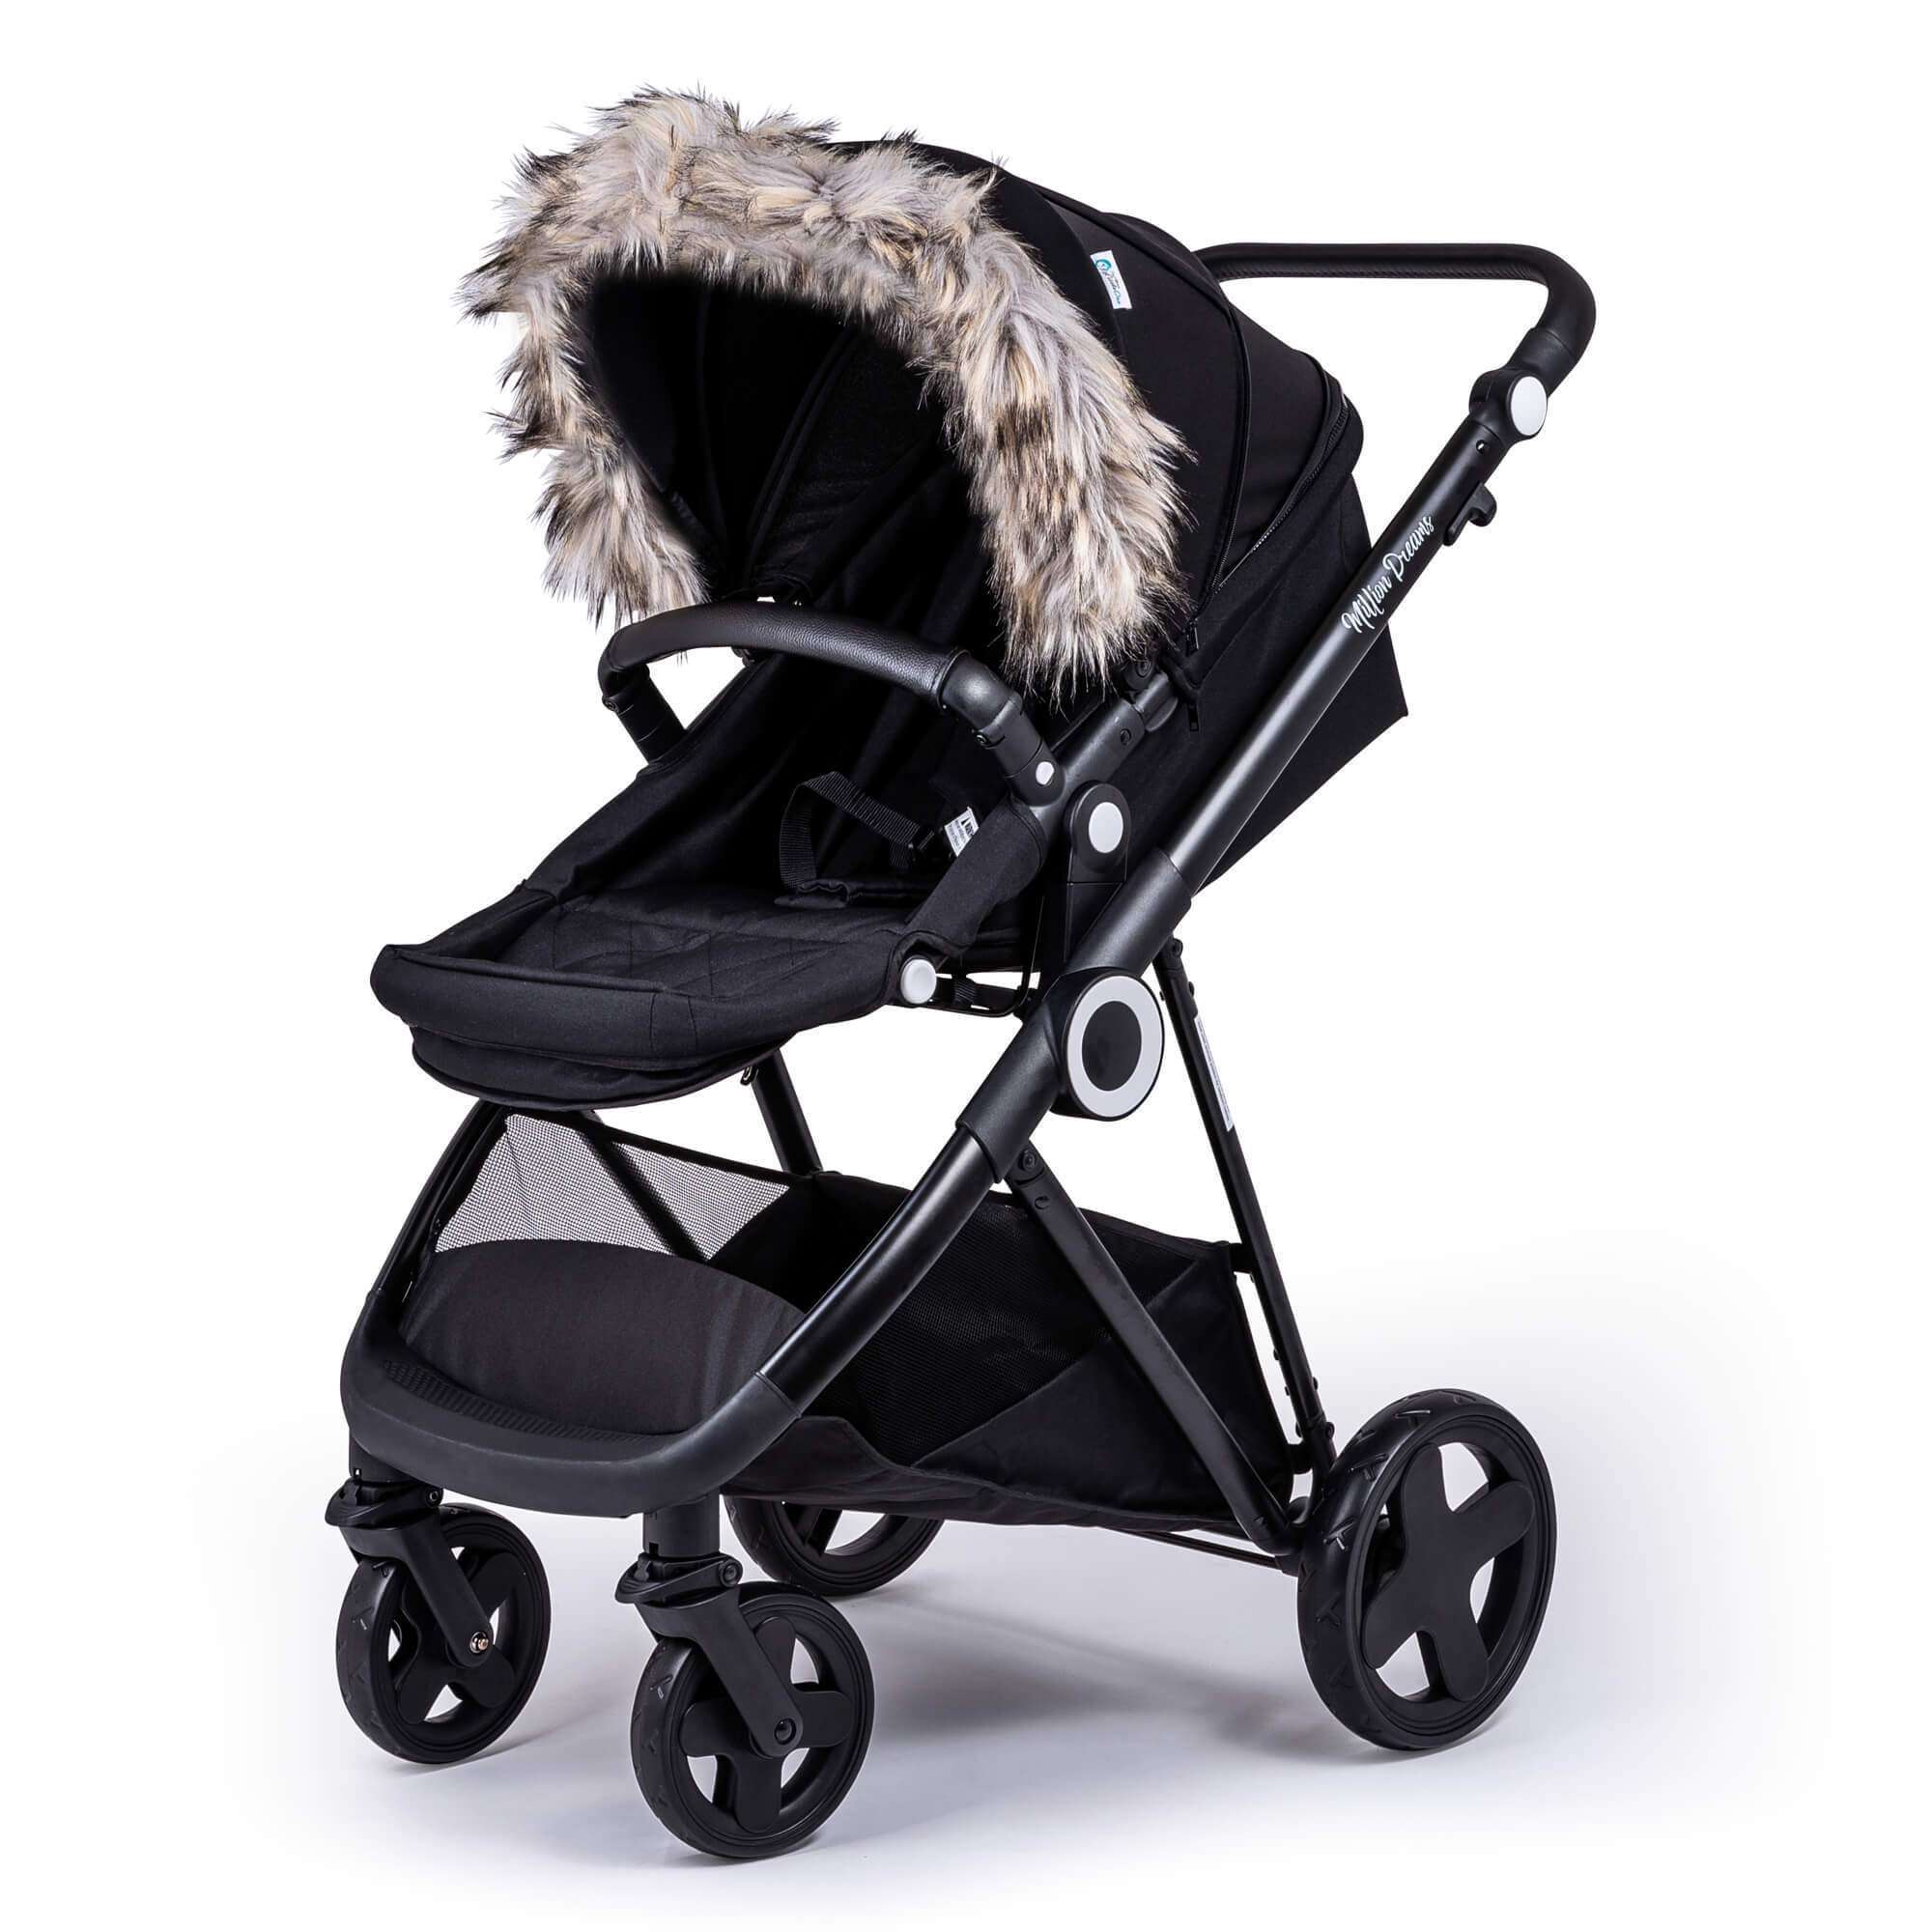 Pram Fur Hood Trim Attachment For Pushchair Compatible with Infababy - For Your Little One